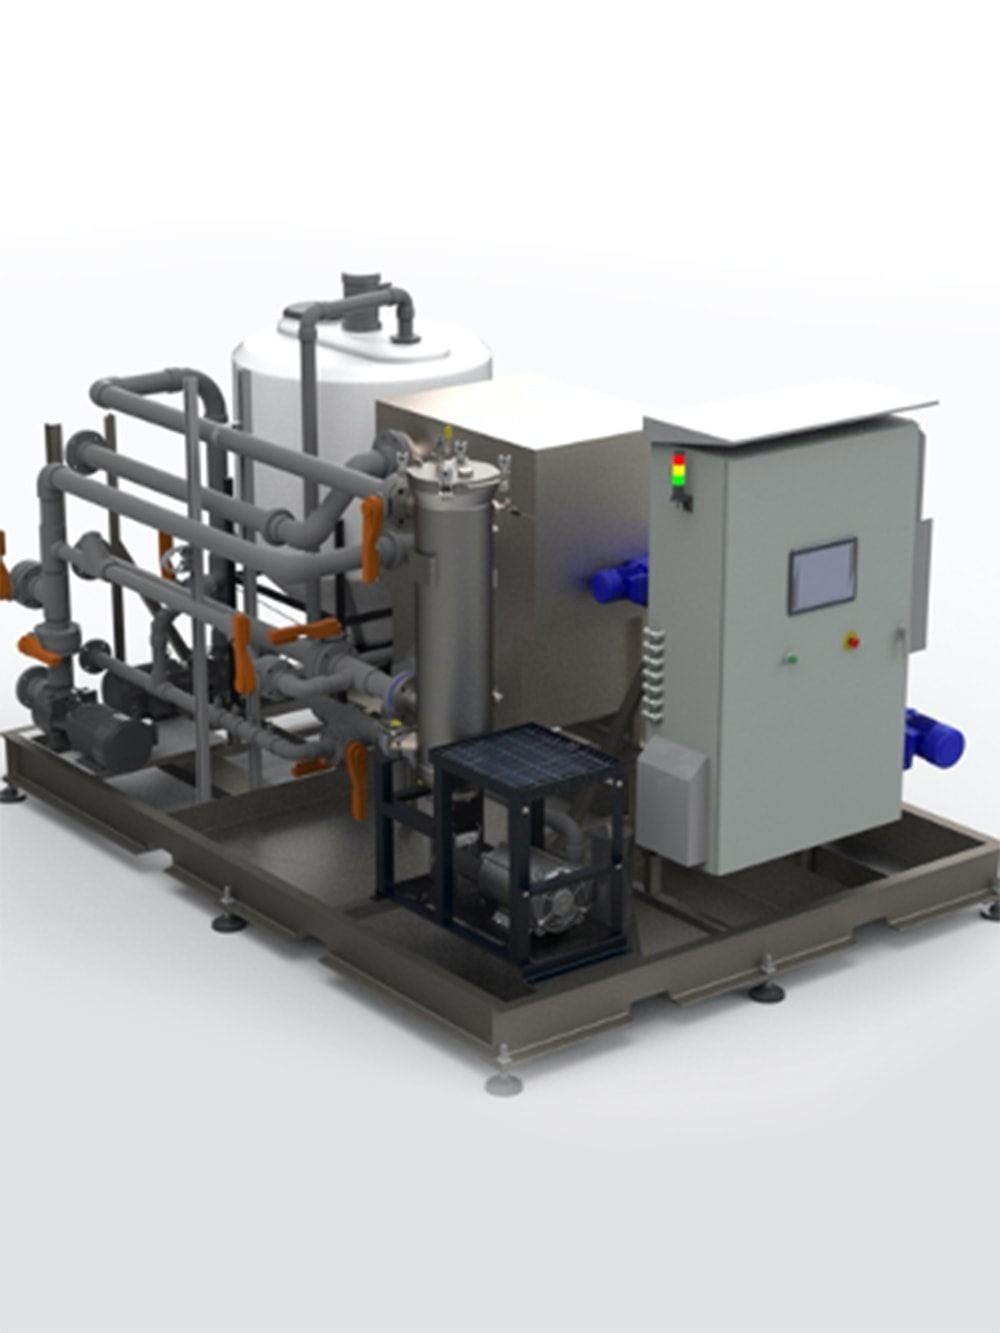 Swt introduces high solids water recovery system